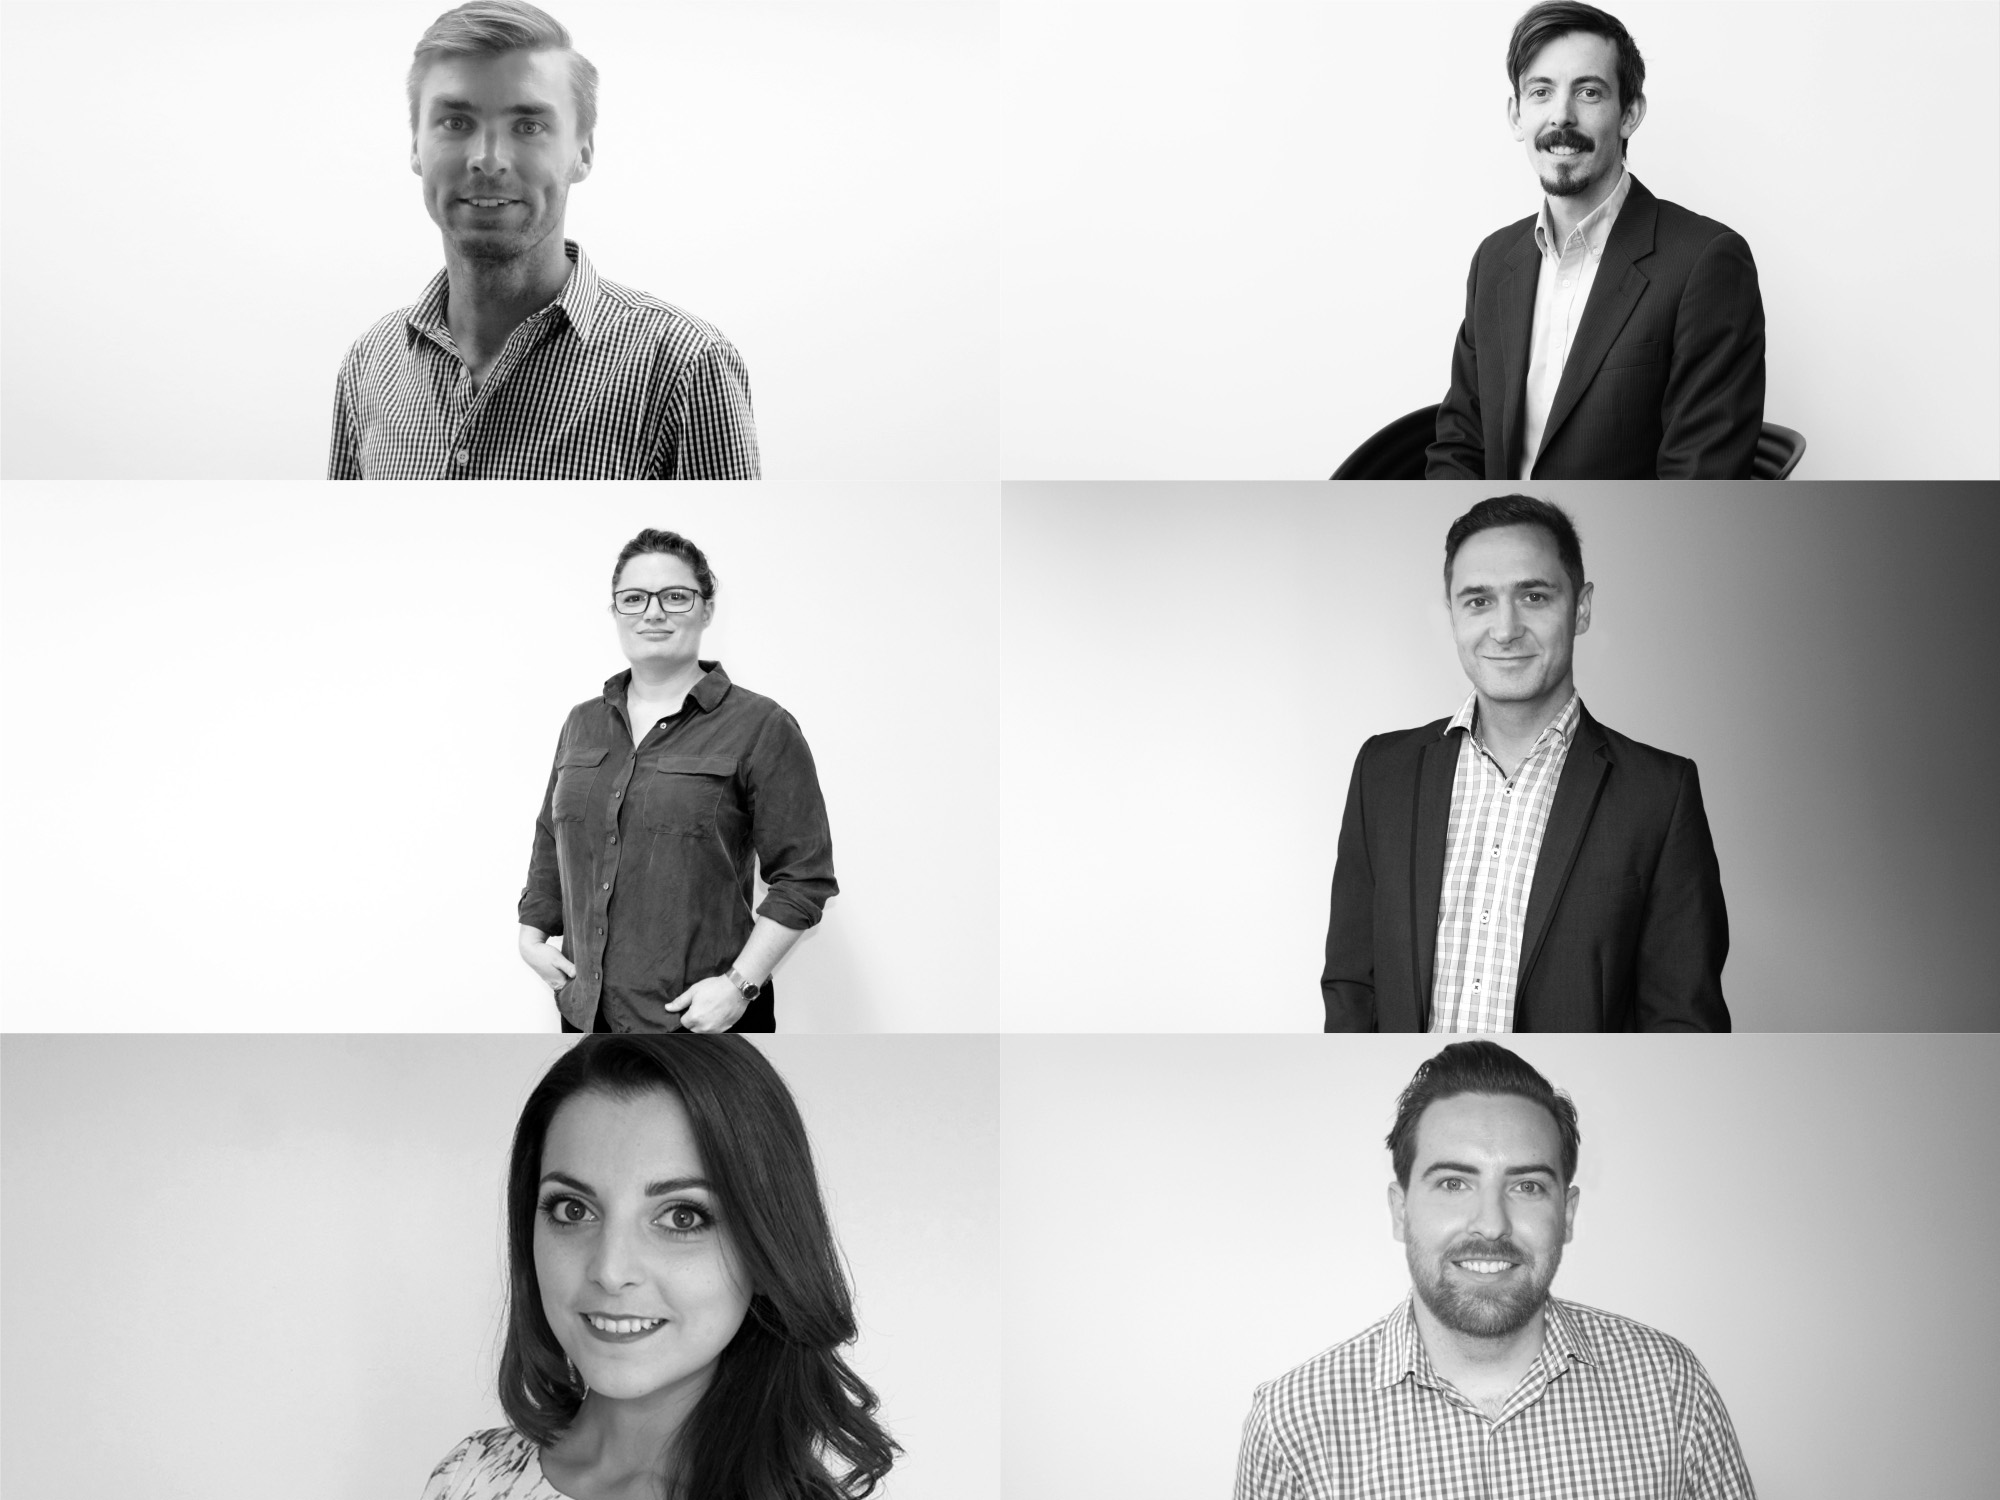 MODE says that these new appointments will continue to accelerate growth exponentially for the practice, as a leader across all sectors and geographically across Australasia as MODE nears closer to a total workforce of 150 full-time employees. Image: Supplied
